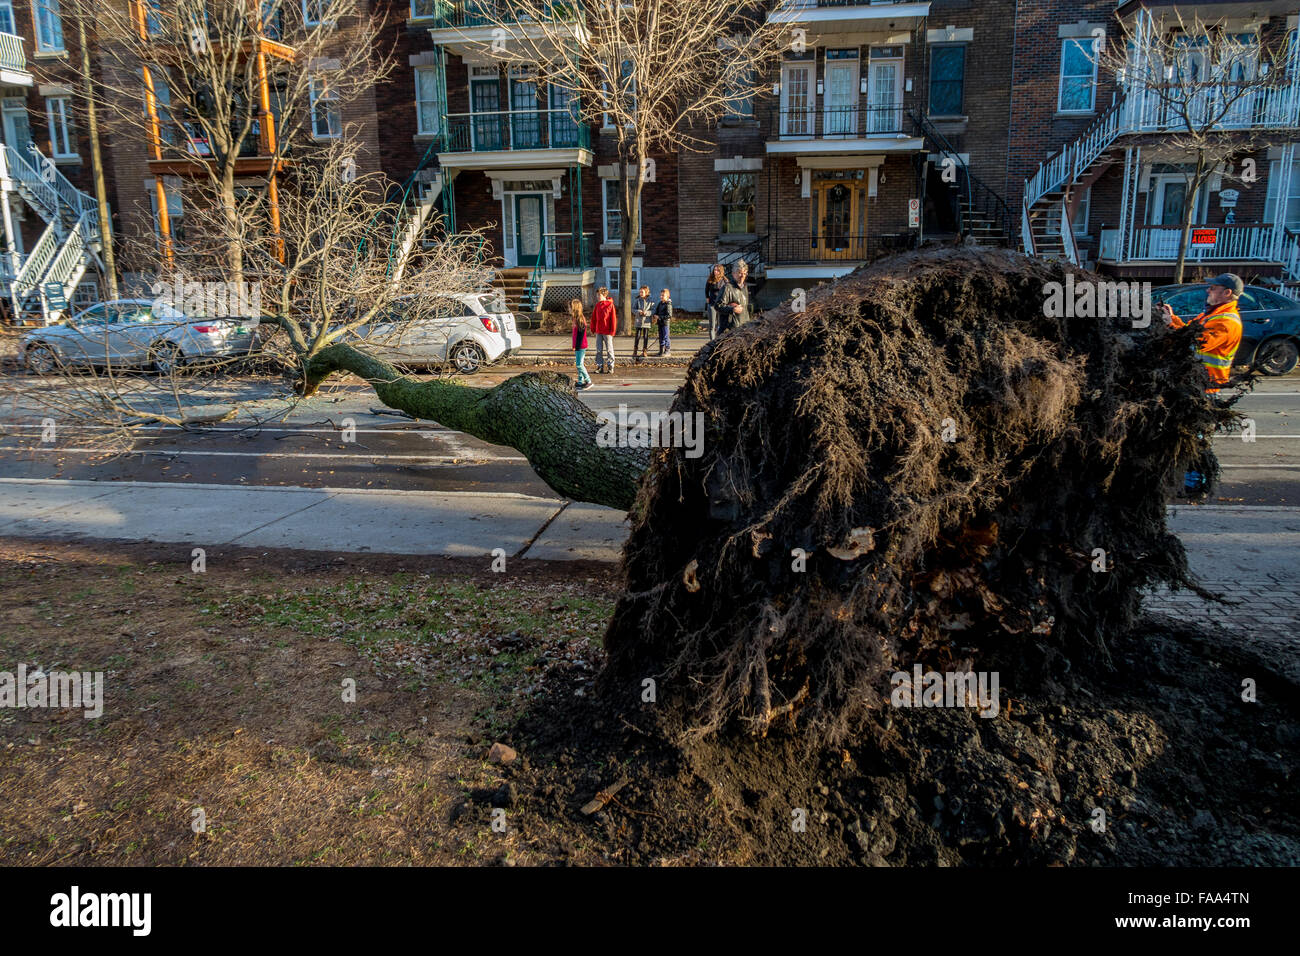 Montreal, Canada. 24th December, 2015. A tree falls across a street on a car as a result of strong winds on Laurier street in Montreal. Credit:  Marc Bruxelle/Alamy Live News Stock Photo